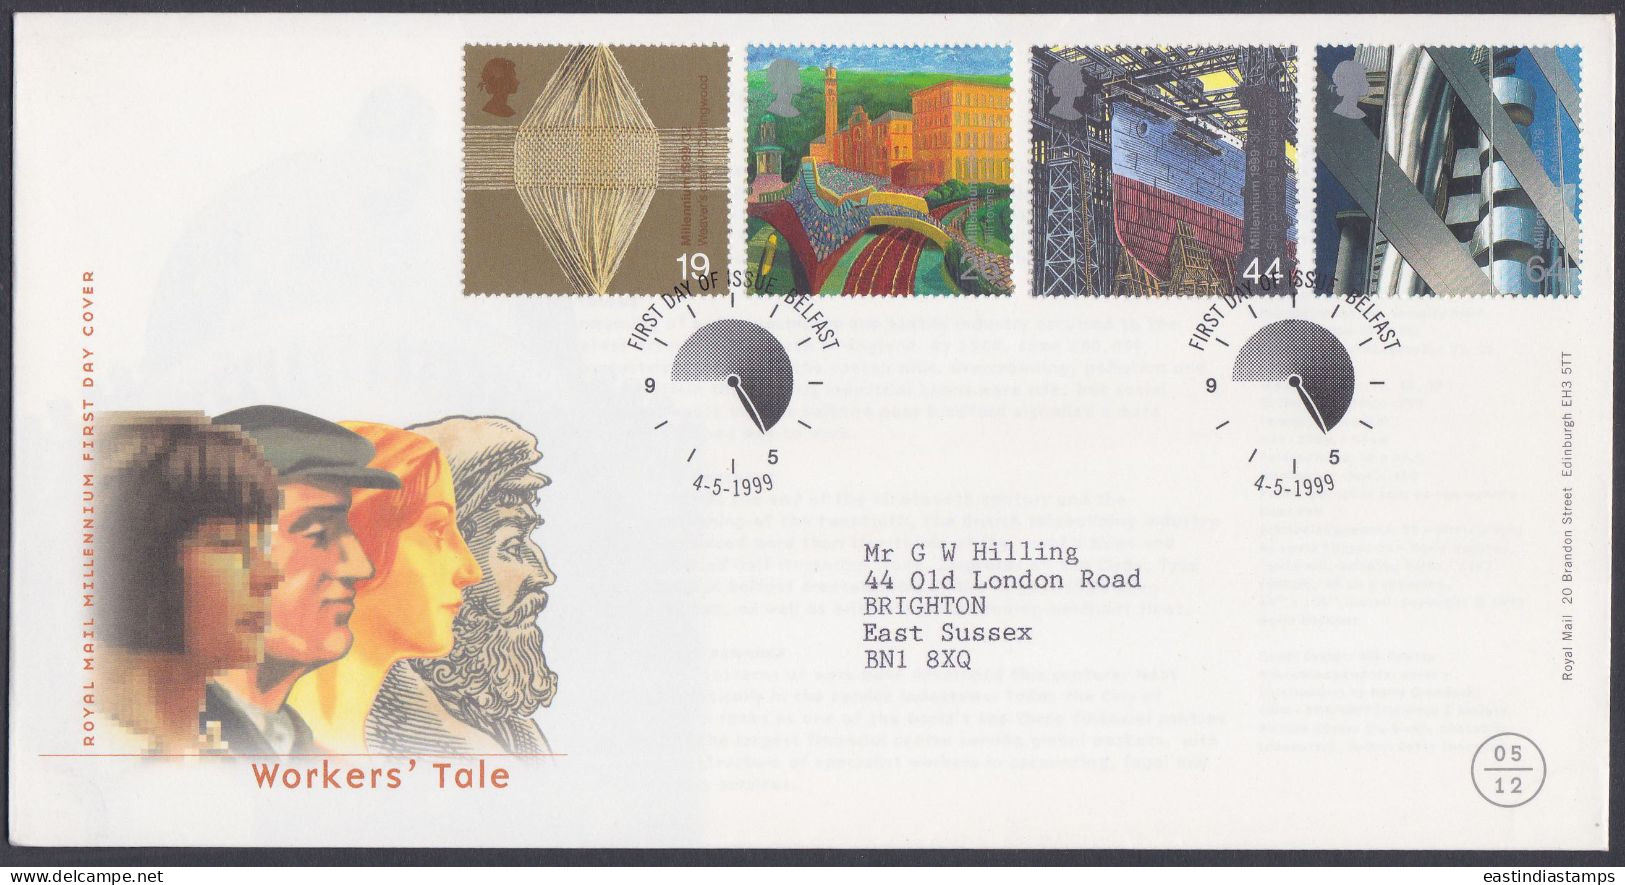 GB Great Britain 1999 FDC Workers' Tale, Industry, Factory, Ship, Textile, Pictorial Postmark, First Day Cover - Covers & Documents